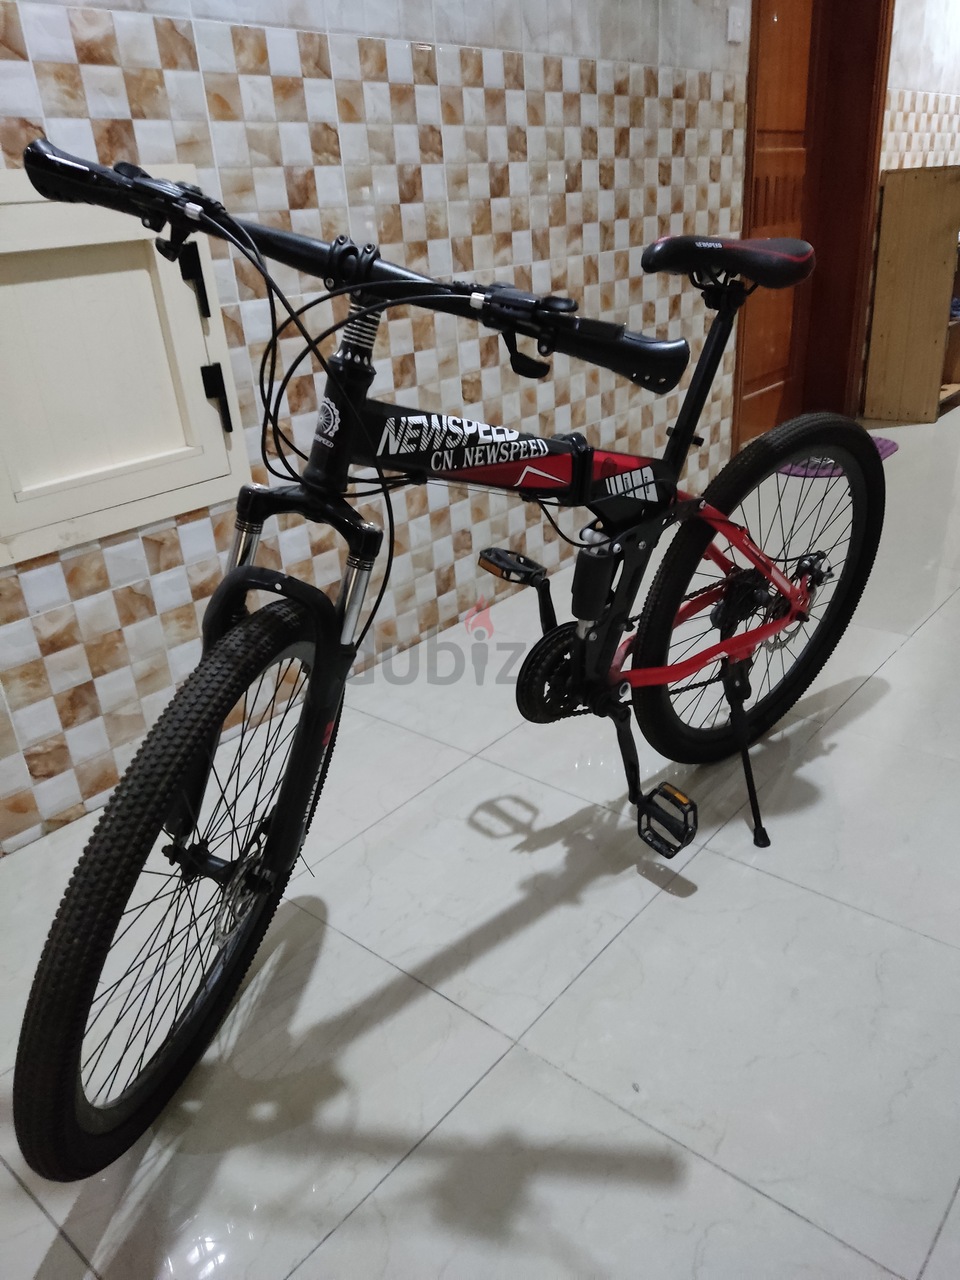 Foldable Gear cycle for sale dubizzle